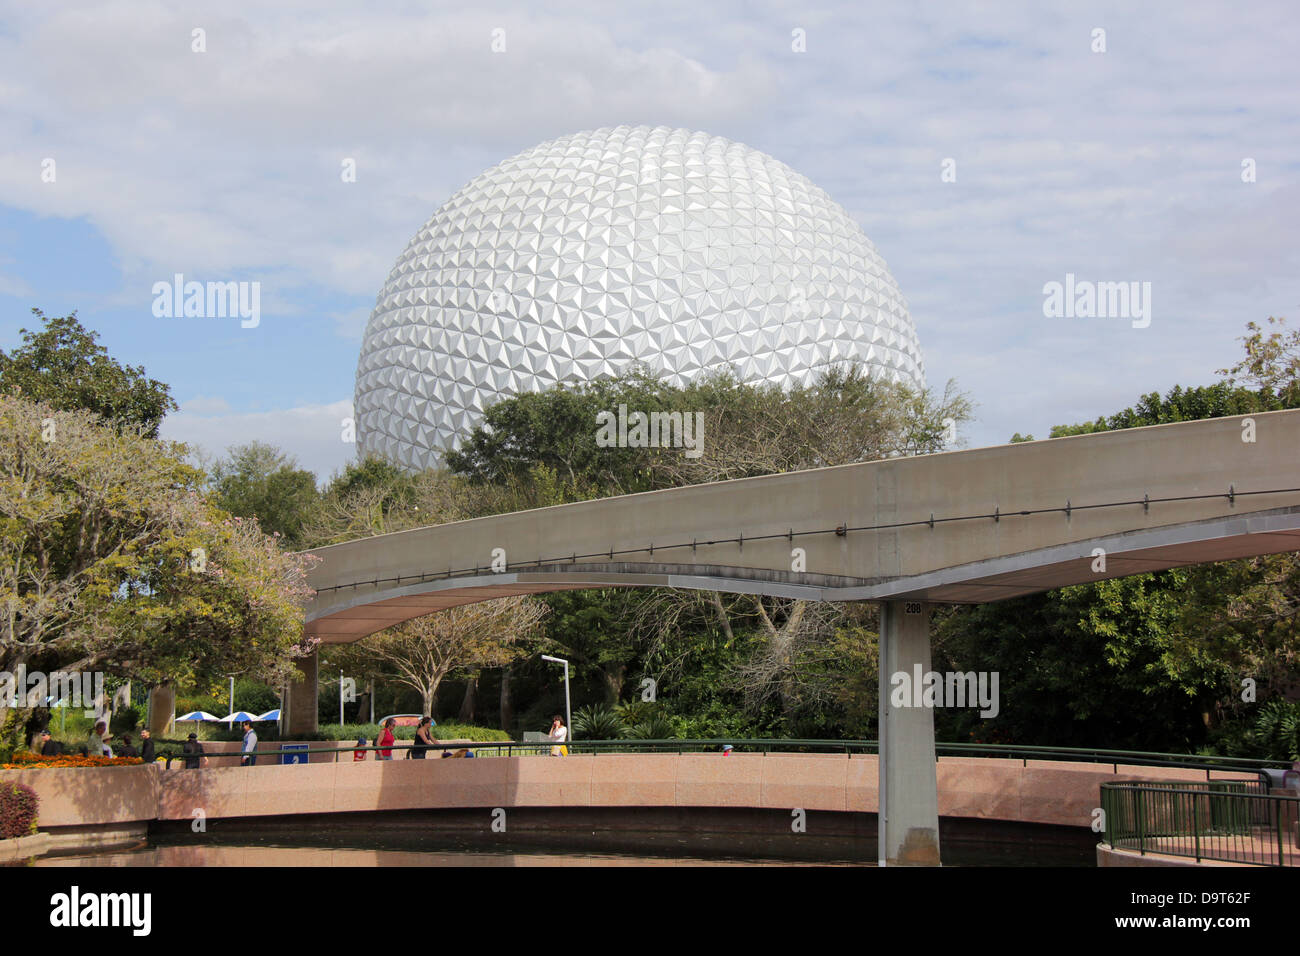 Epcot Center sphere with the monorail in front. Stock Photo